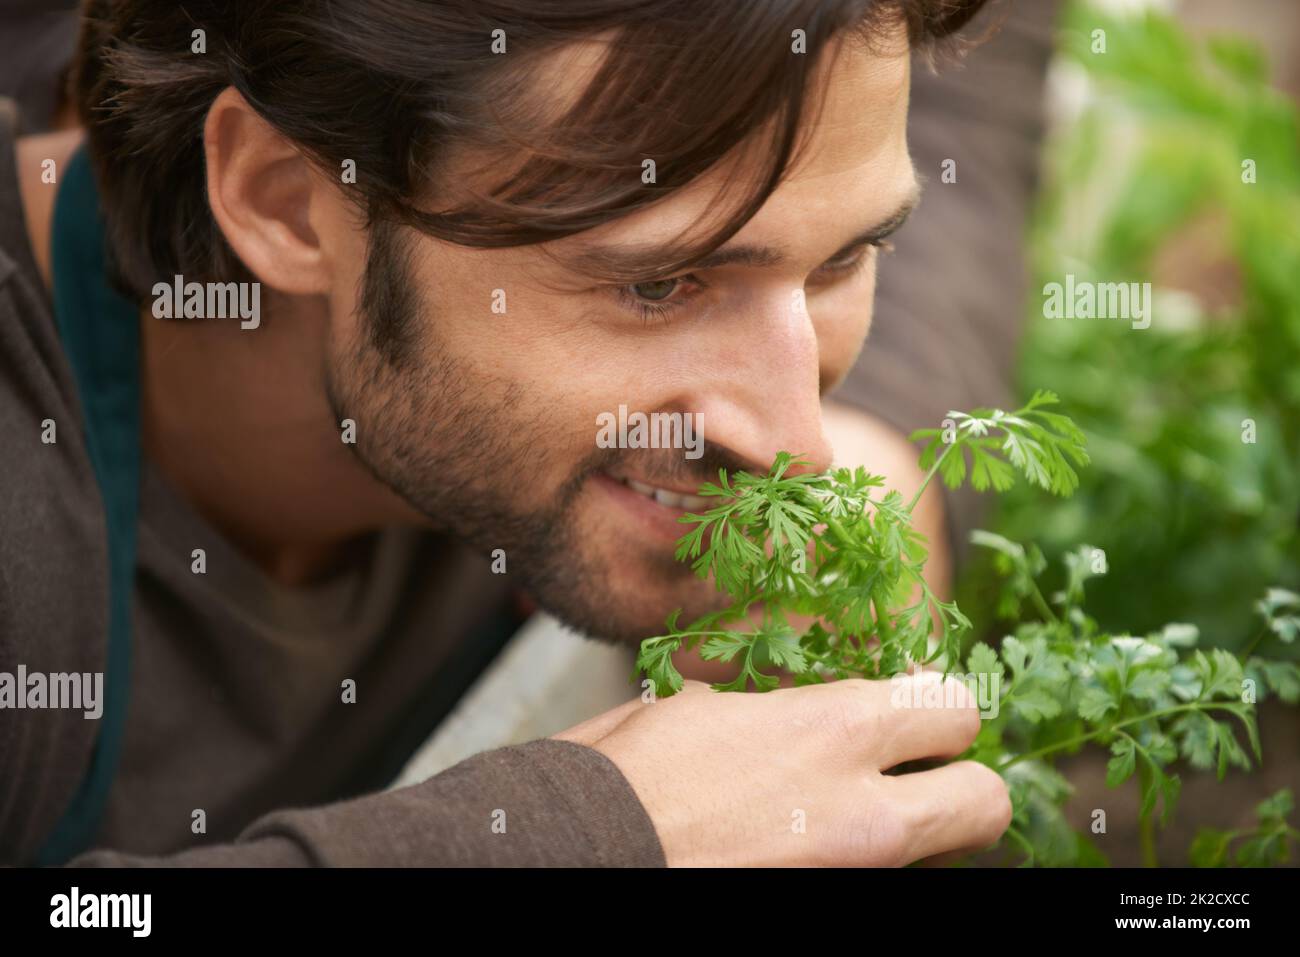 Nothing beats the smell of fresh herbs. A handsome gardener smelling fresh herbs in a nursery. Stock Photo